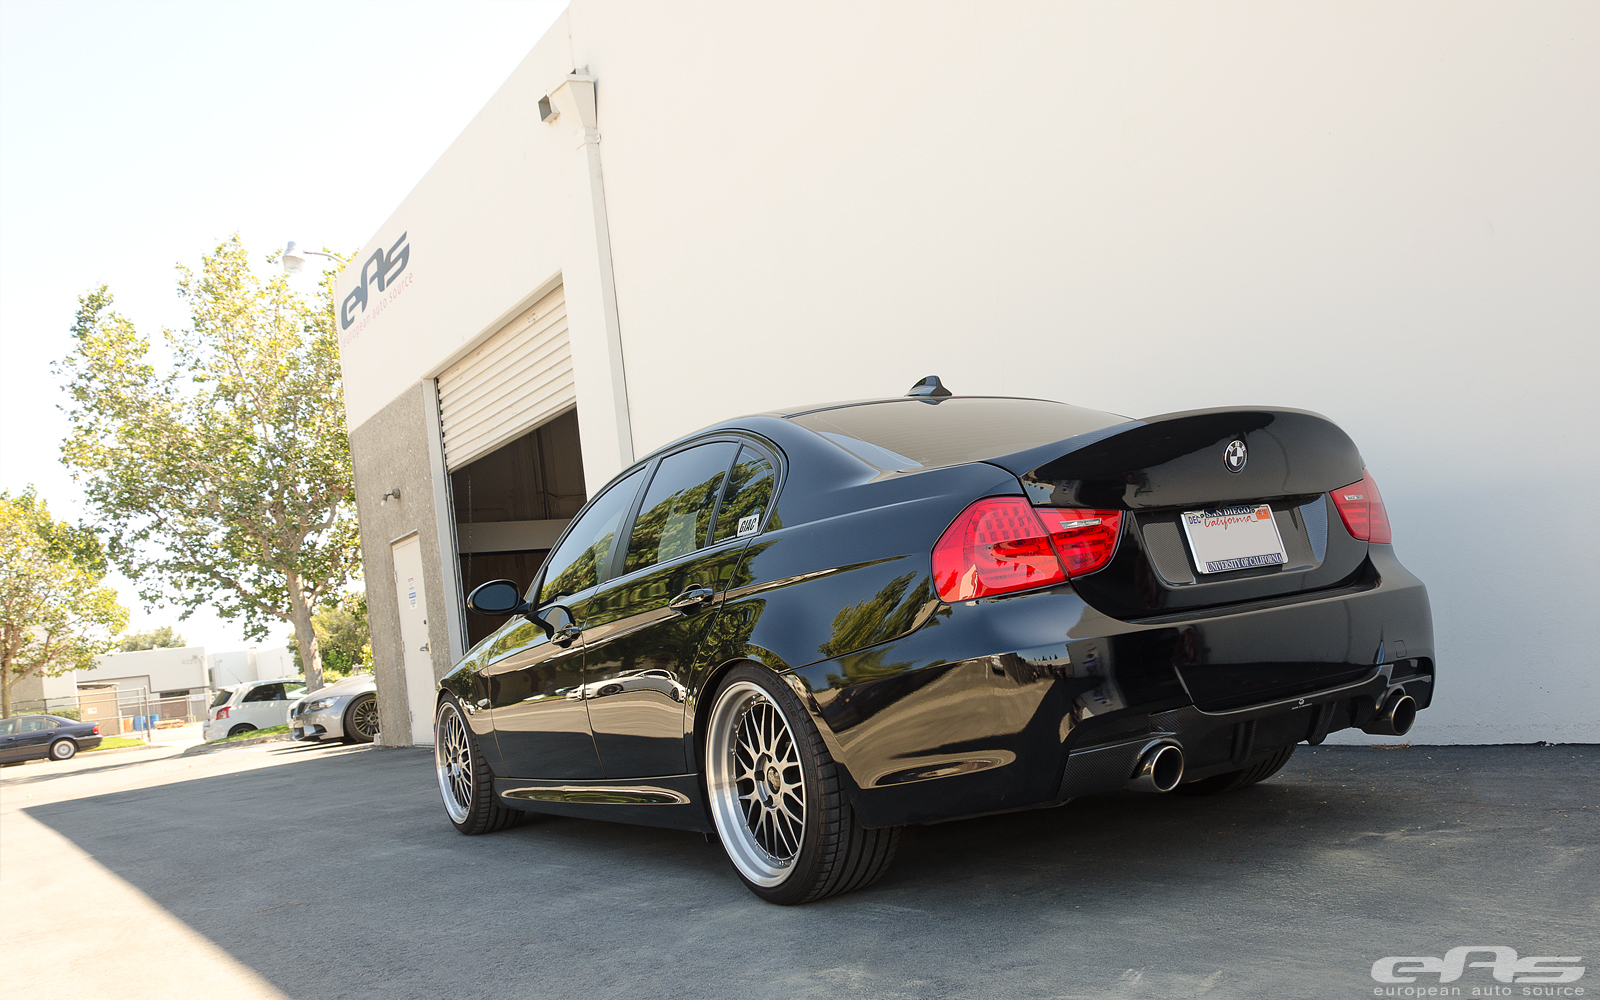 Extremely Tuned BMW E90 335i Hails from EAS - autoevolution